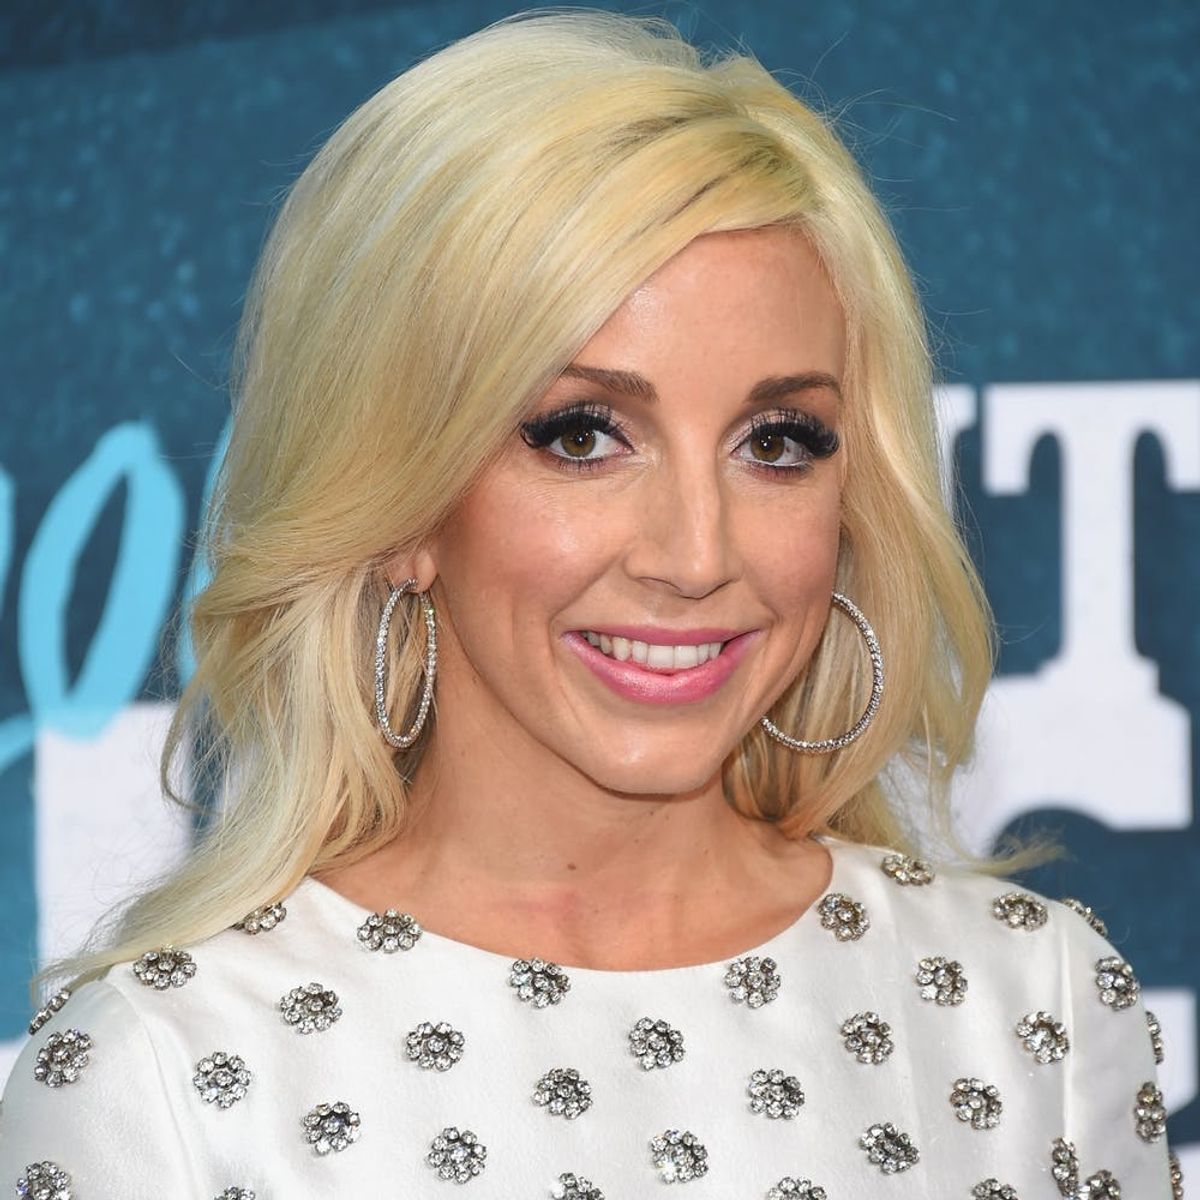 Exclusive: Country Music Star Ashley Monroe Dishes About Her Date Night Beauty Secrets